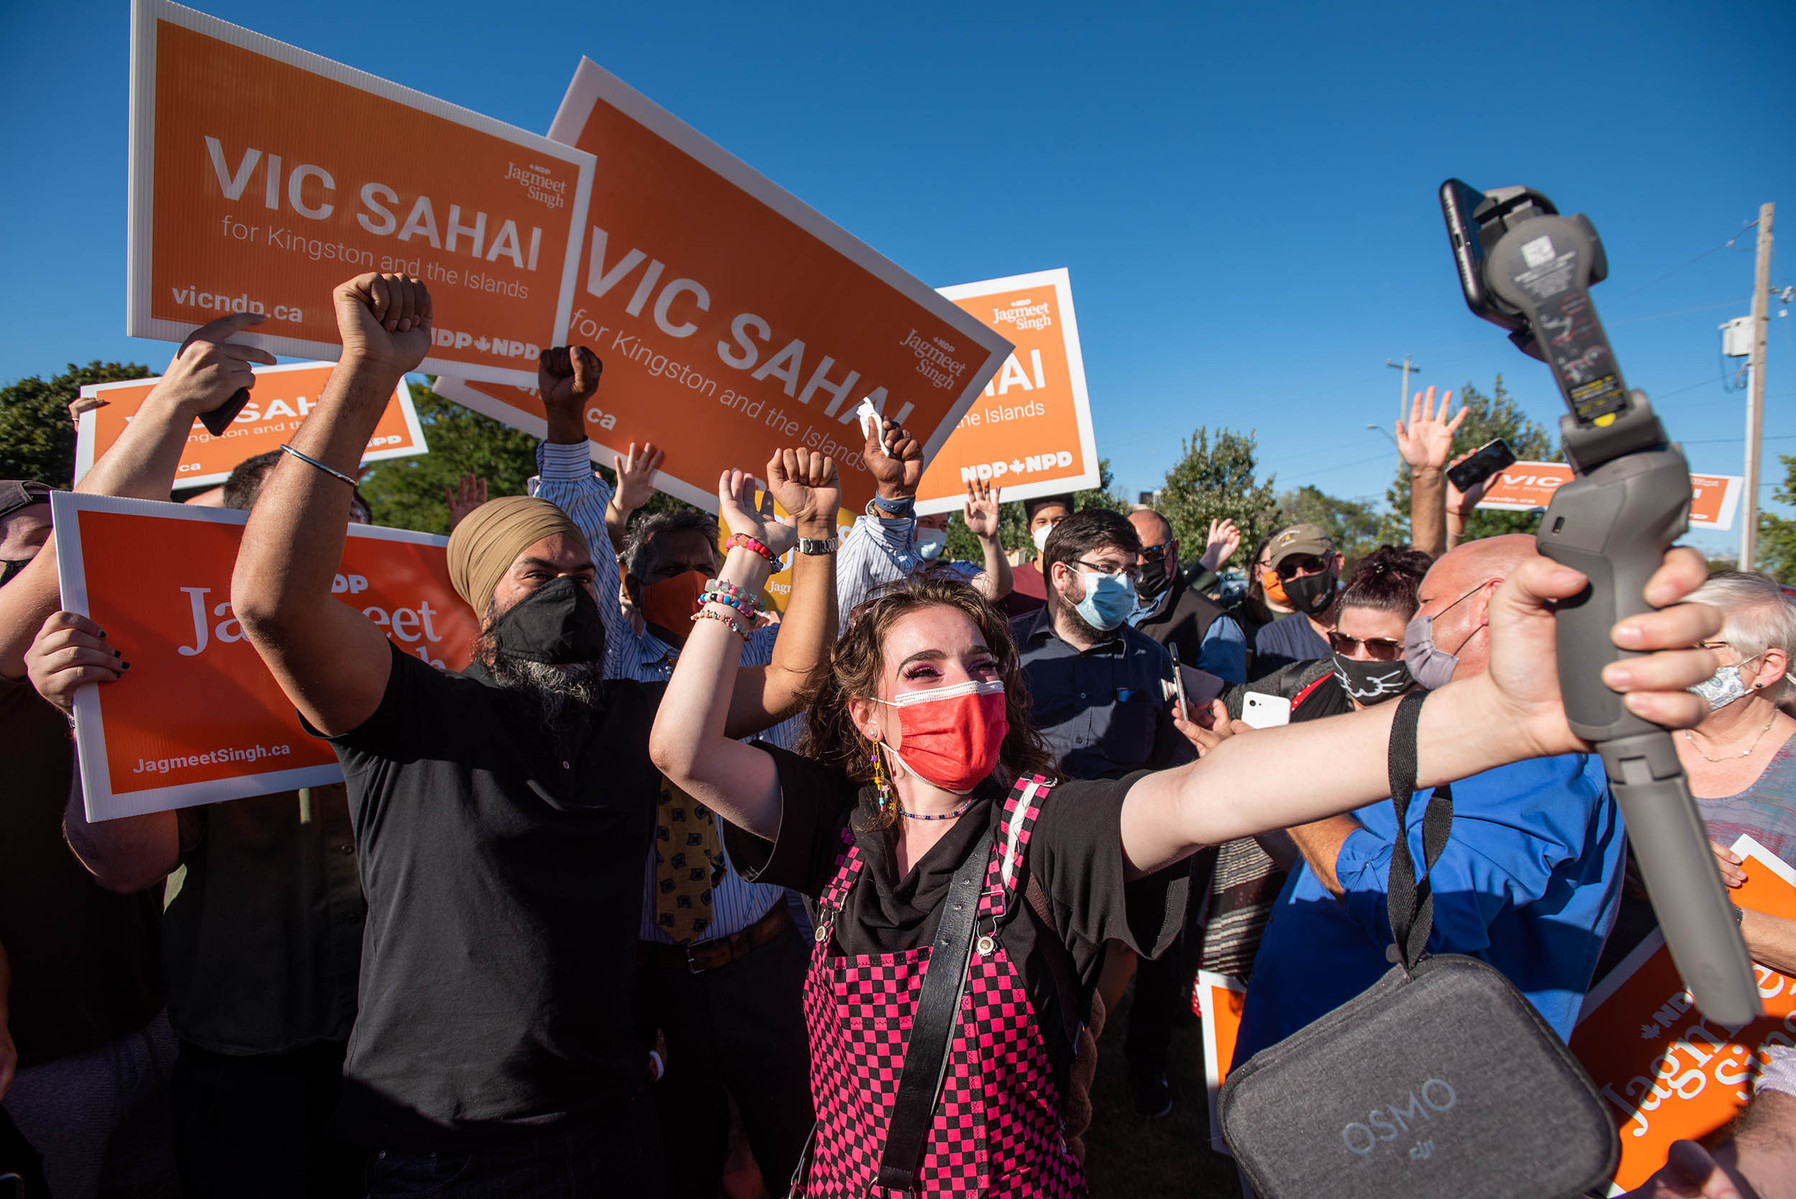 NDP leader Jagmeet Singh participates in a video created by a supporter towards the end of a campaign stop to Lake Ontario Park in Kingston, Ont. on Sept 16. 